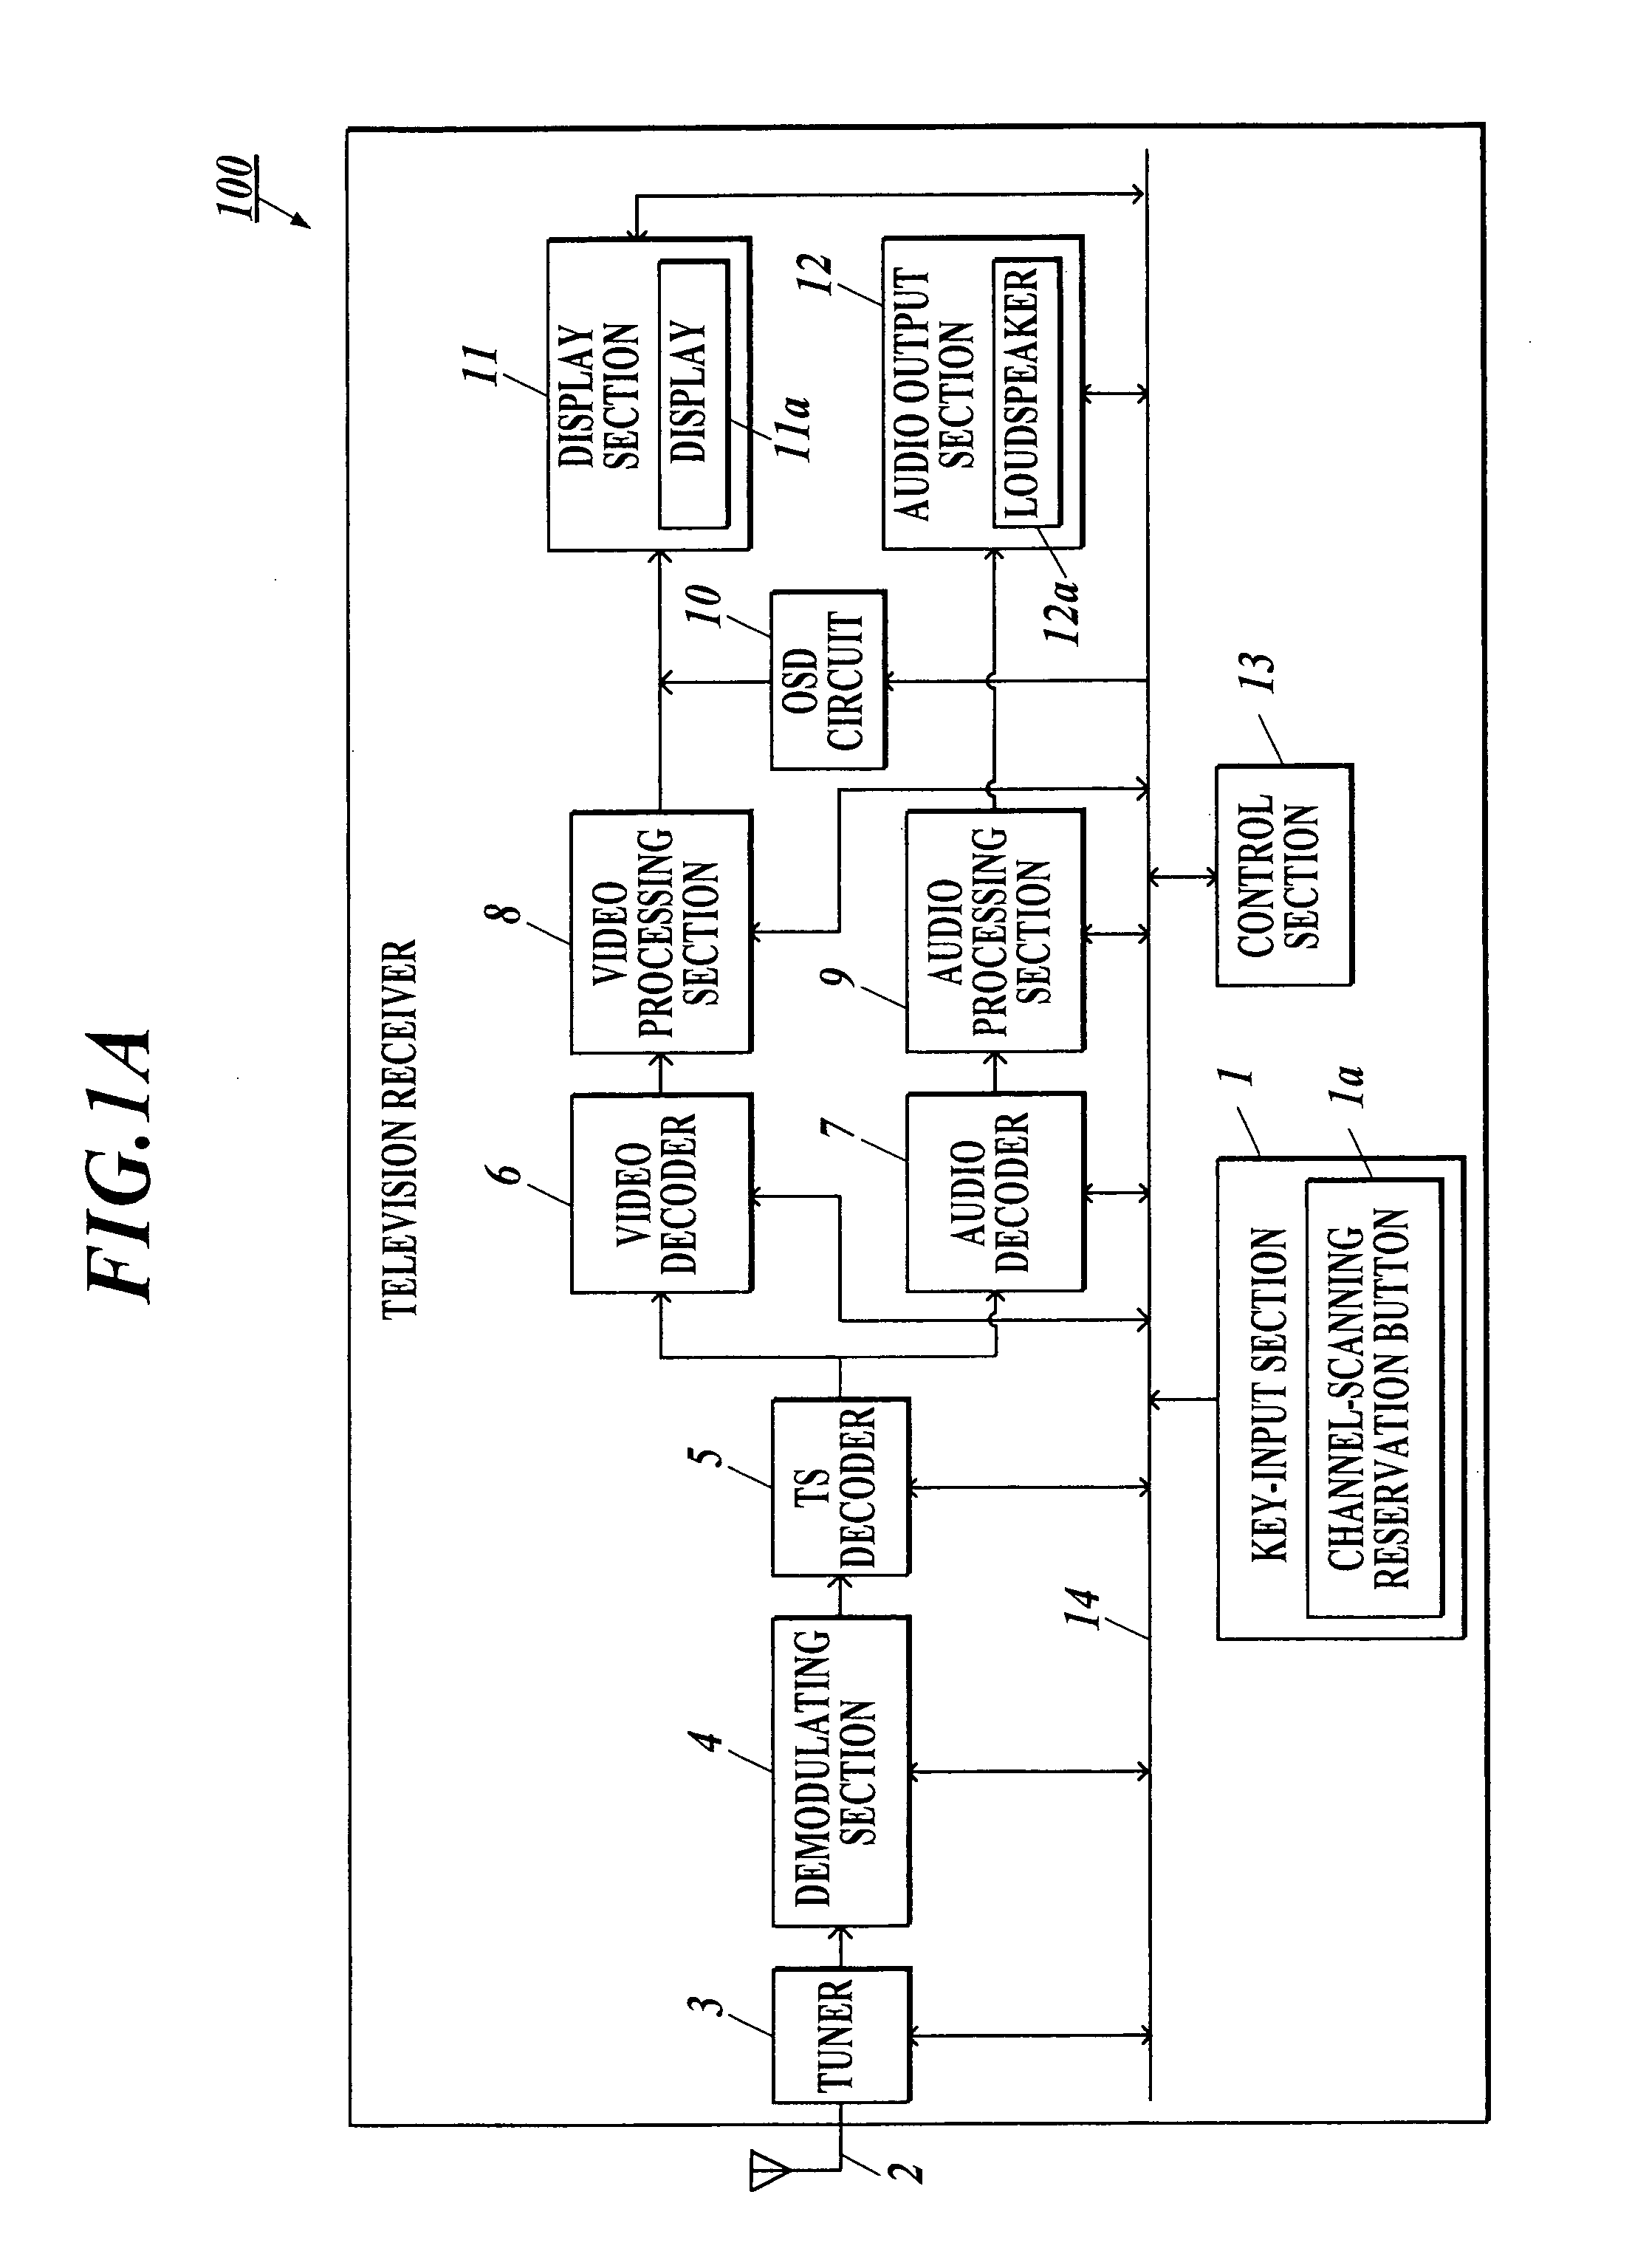 Broadcast reception device and method for renewing channel information in broadcast reception device